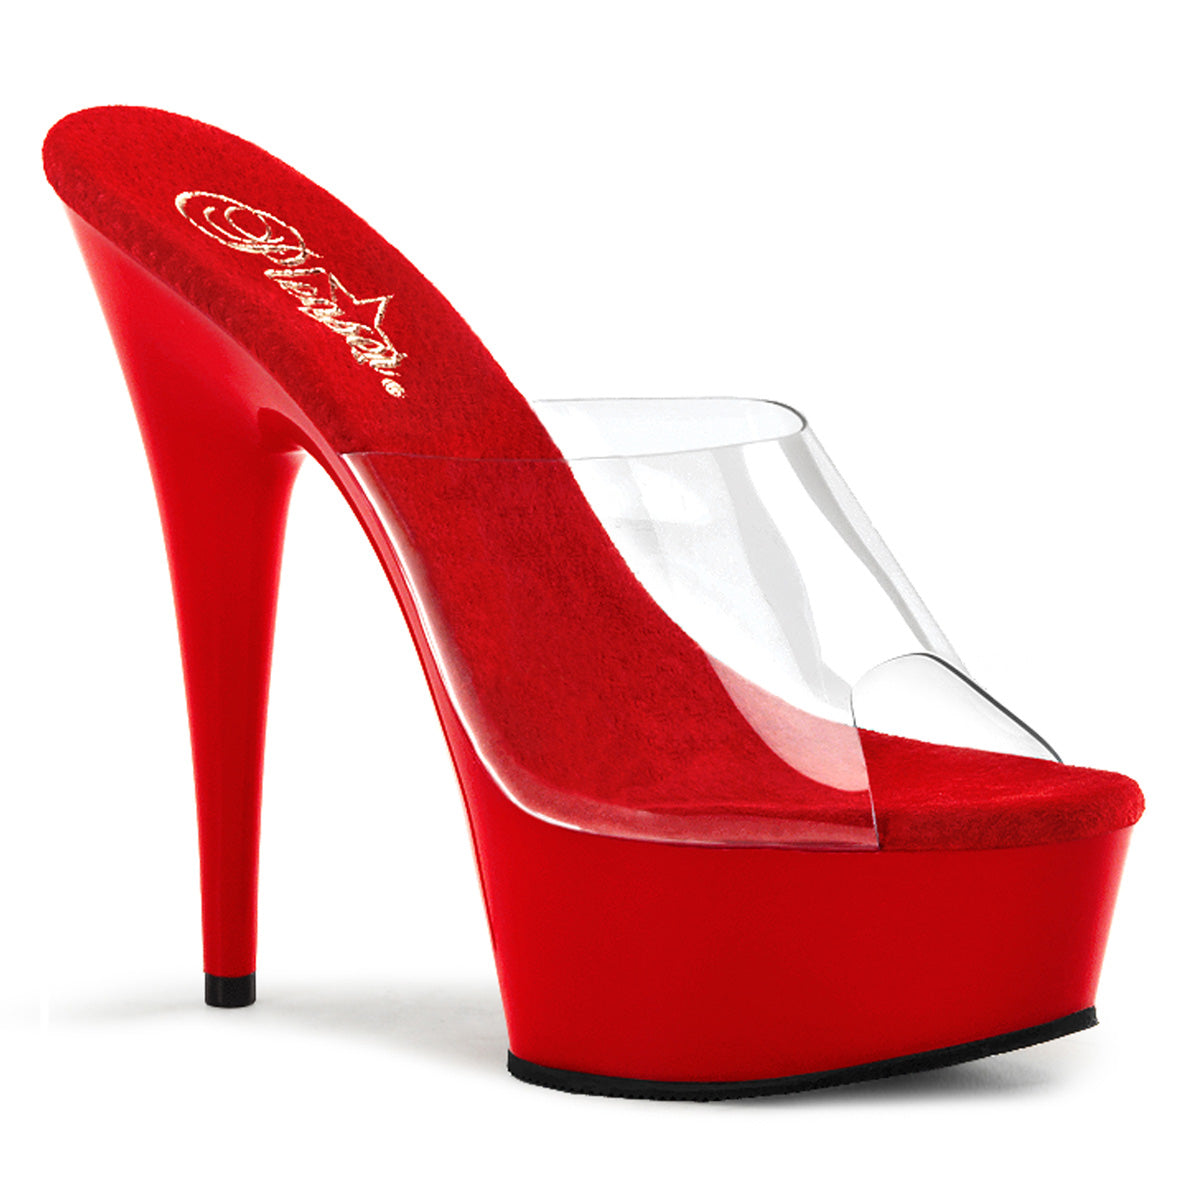 DELIGHT-601 6 Inch Heel Clear and Red  Stripper Platforms High Heels